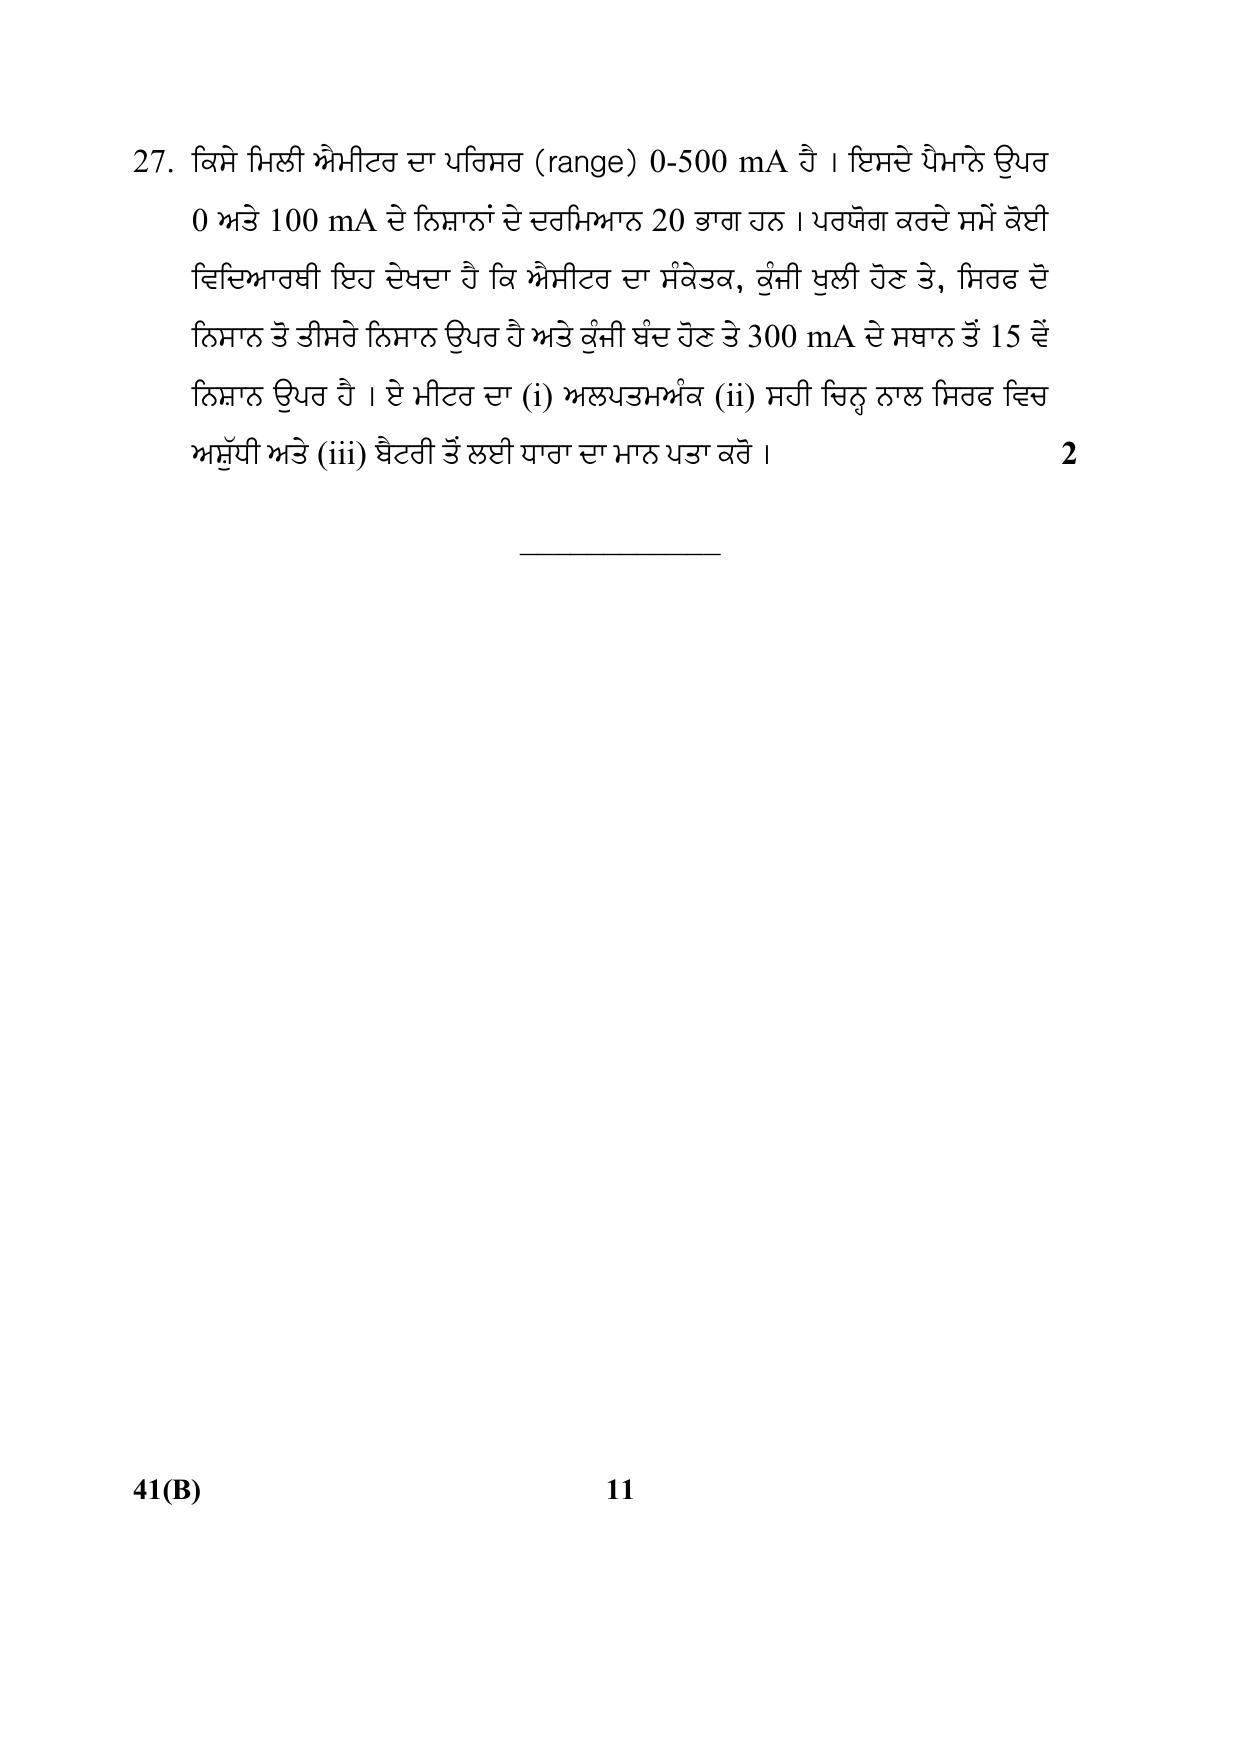 CBSE Class 10 41(B) (Science) For Blind_Punjabi 2018 Question Paper - Page 11